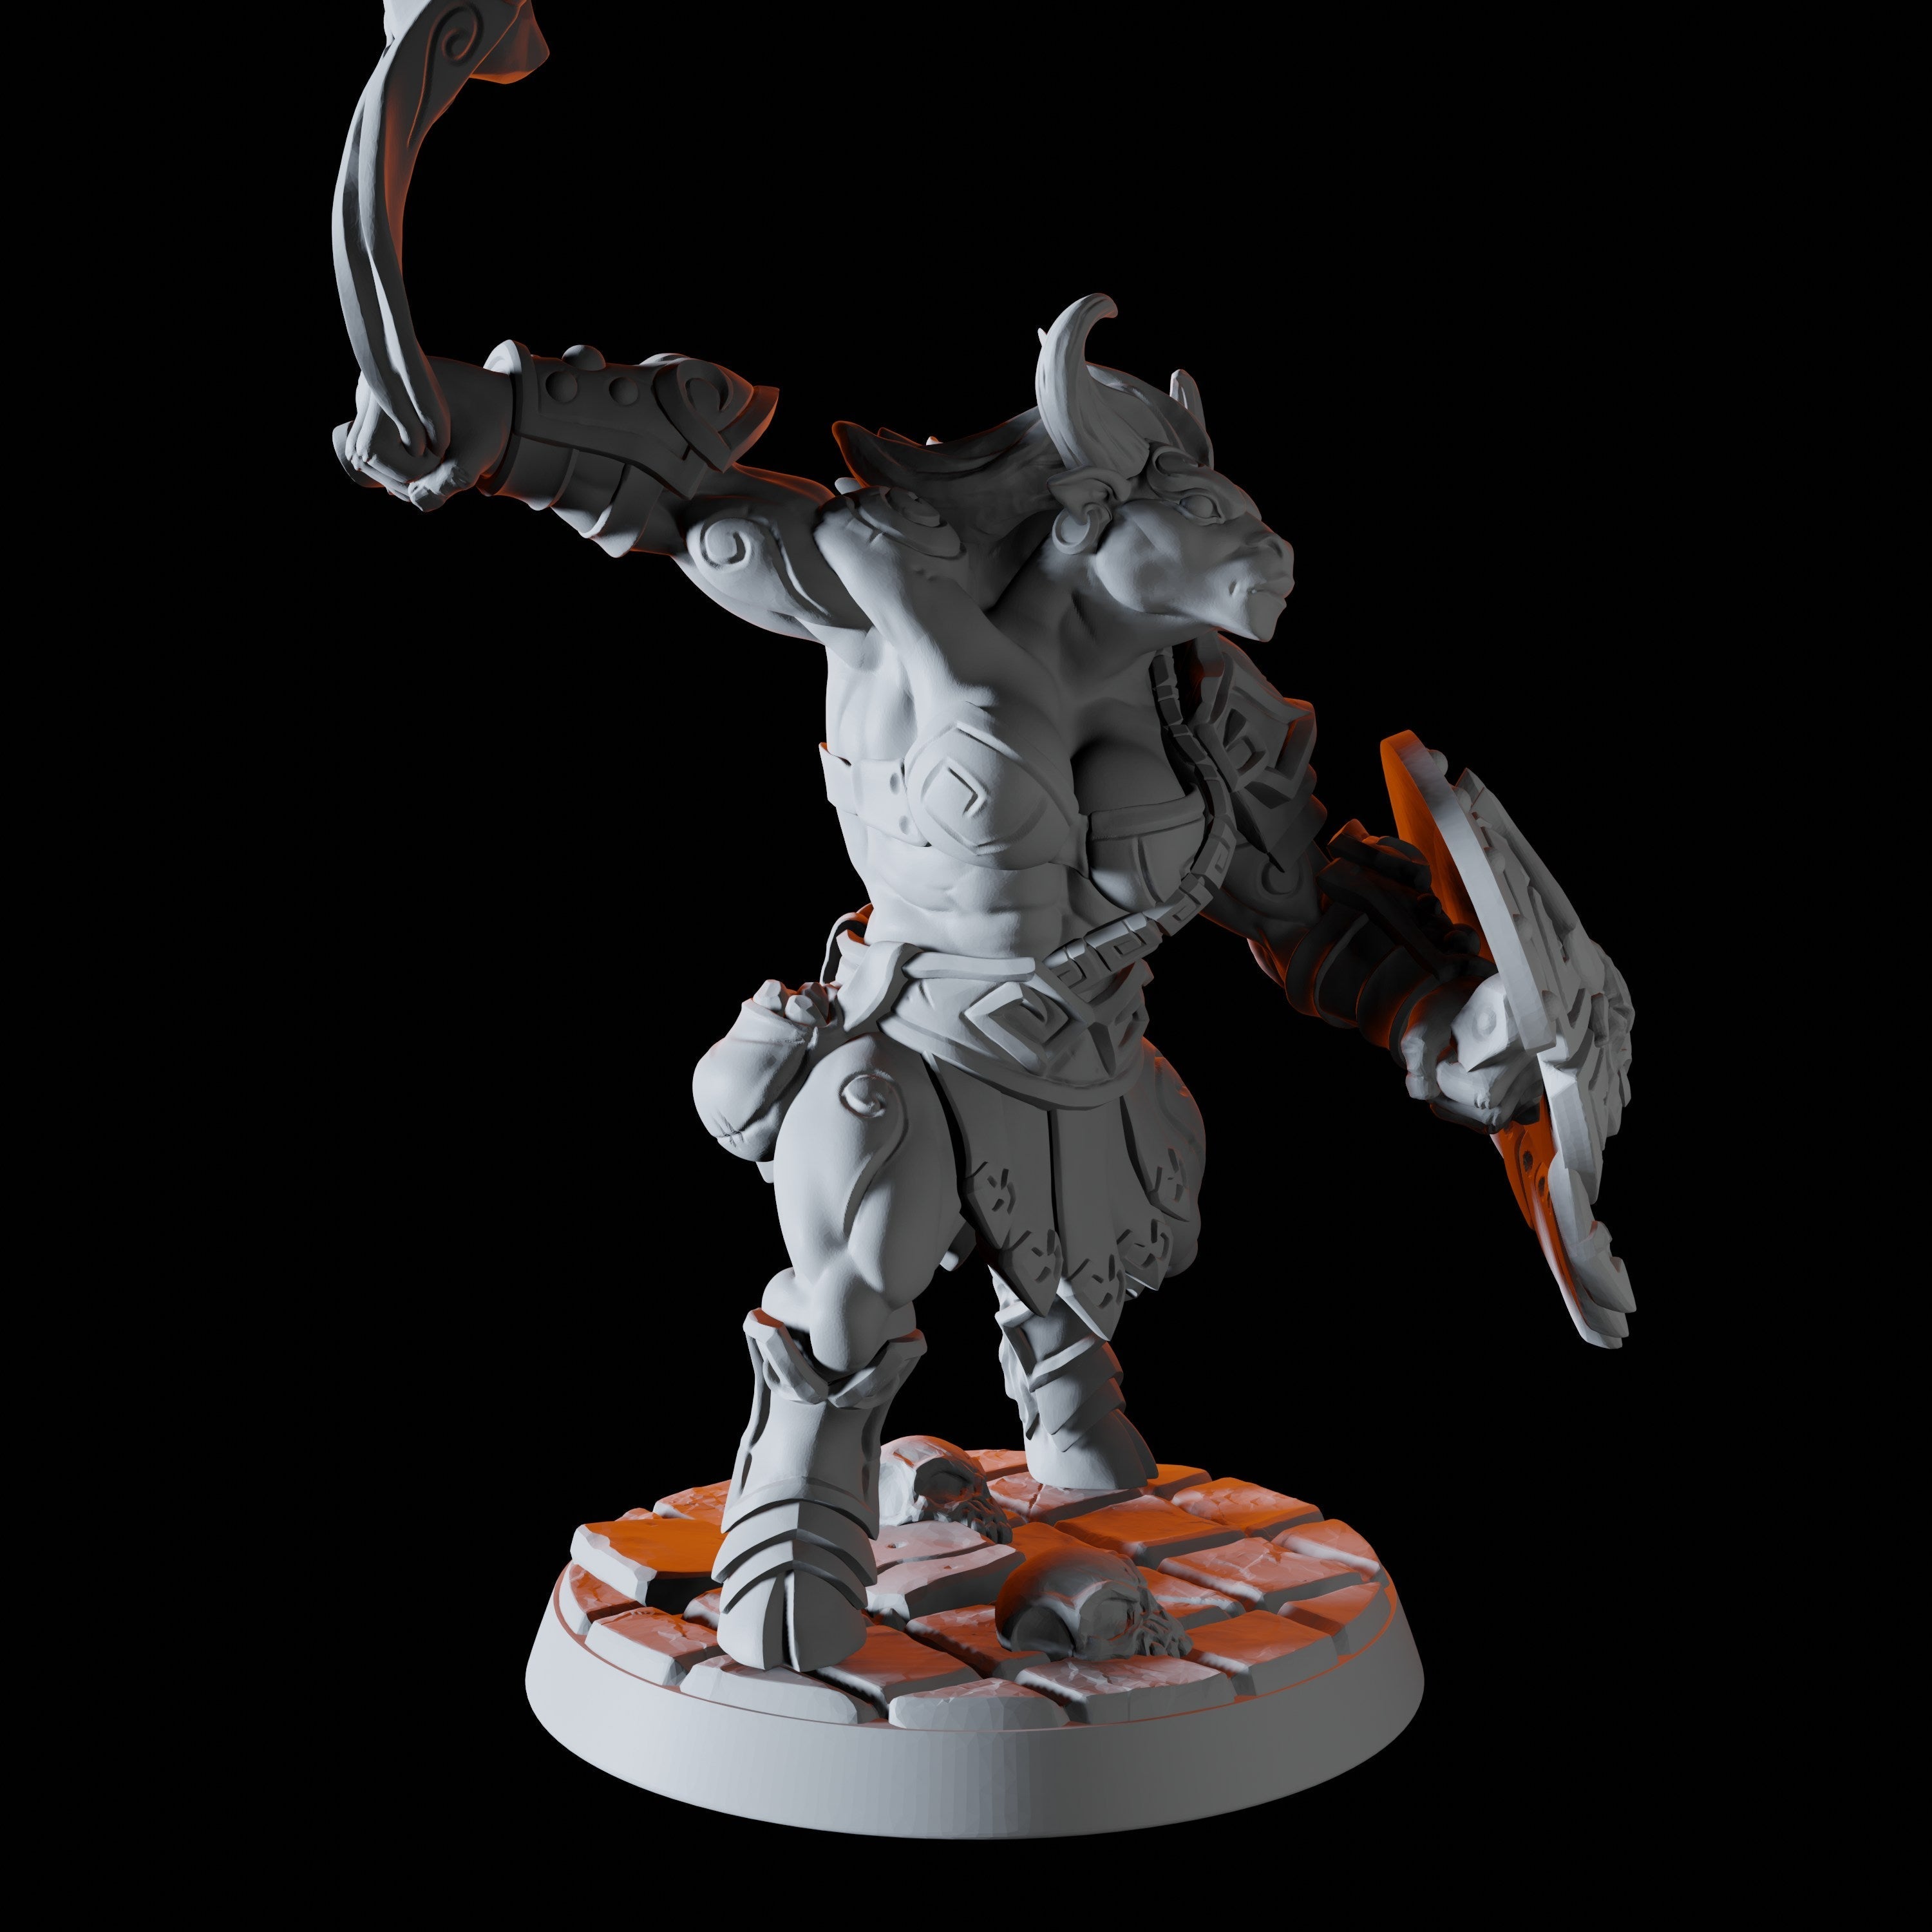 Six Minotaur Miniatures for Dungeons and Dragons - Myth Forged